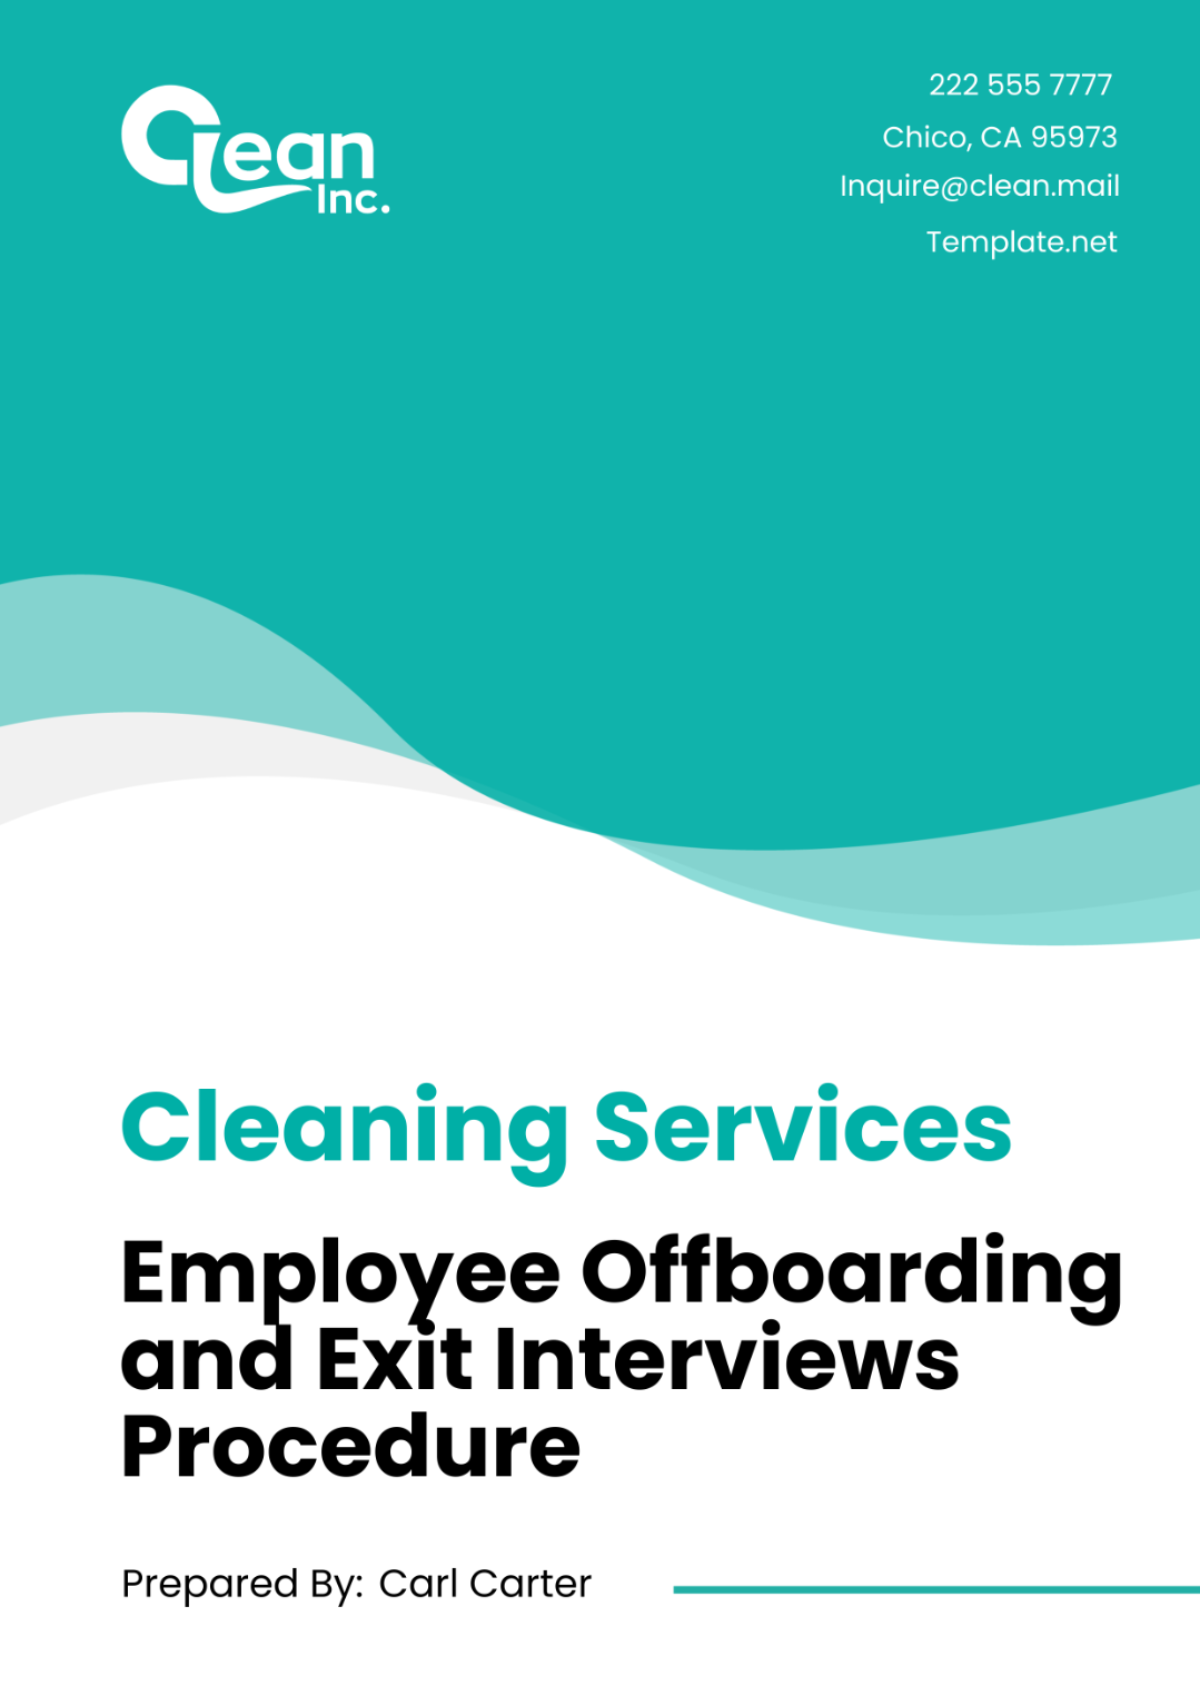 Cleaning Services Employee Offboarding and Exit Interviews Procedure Template